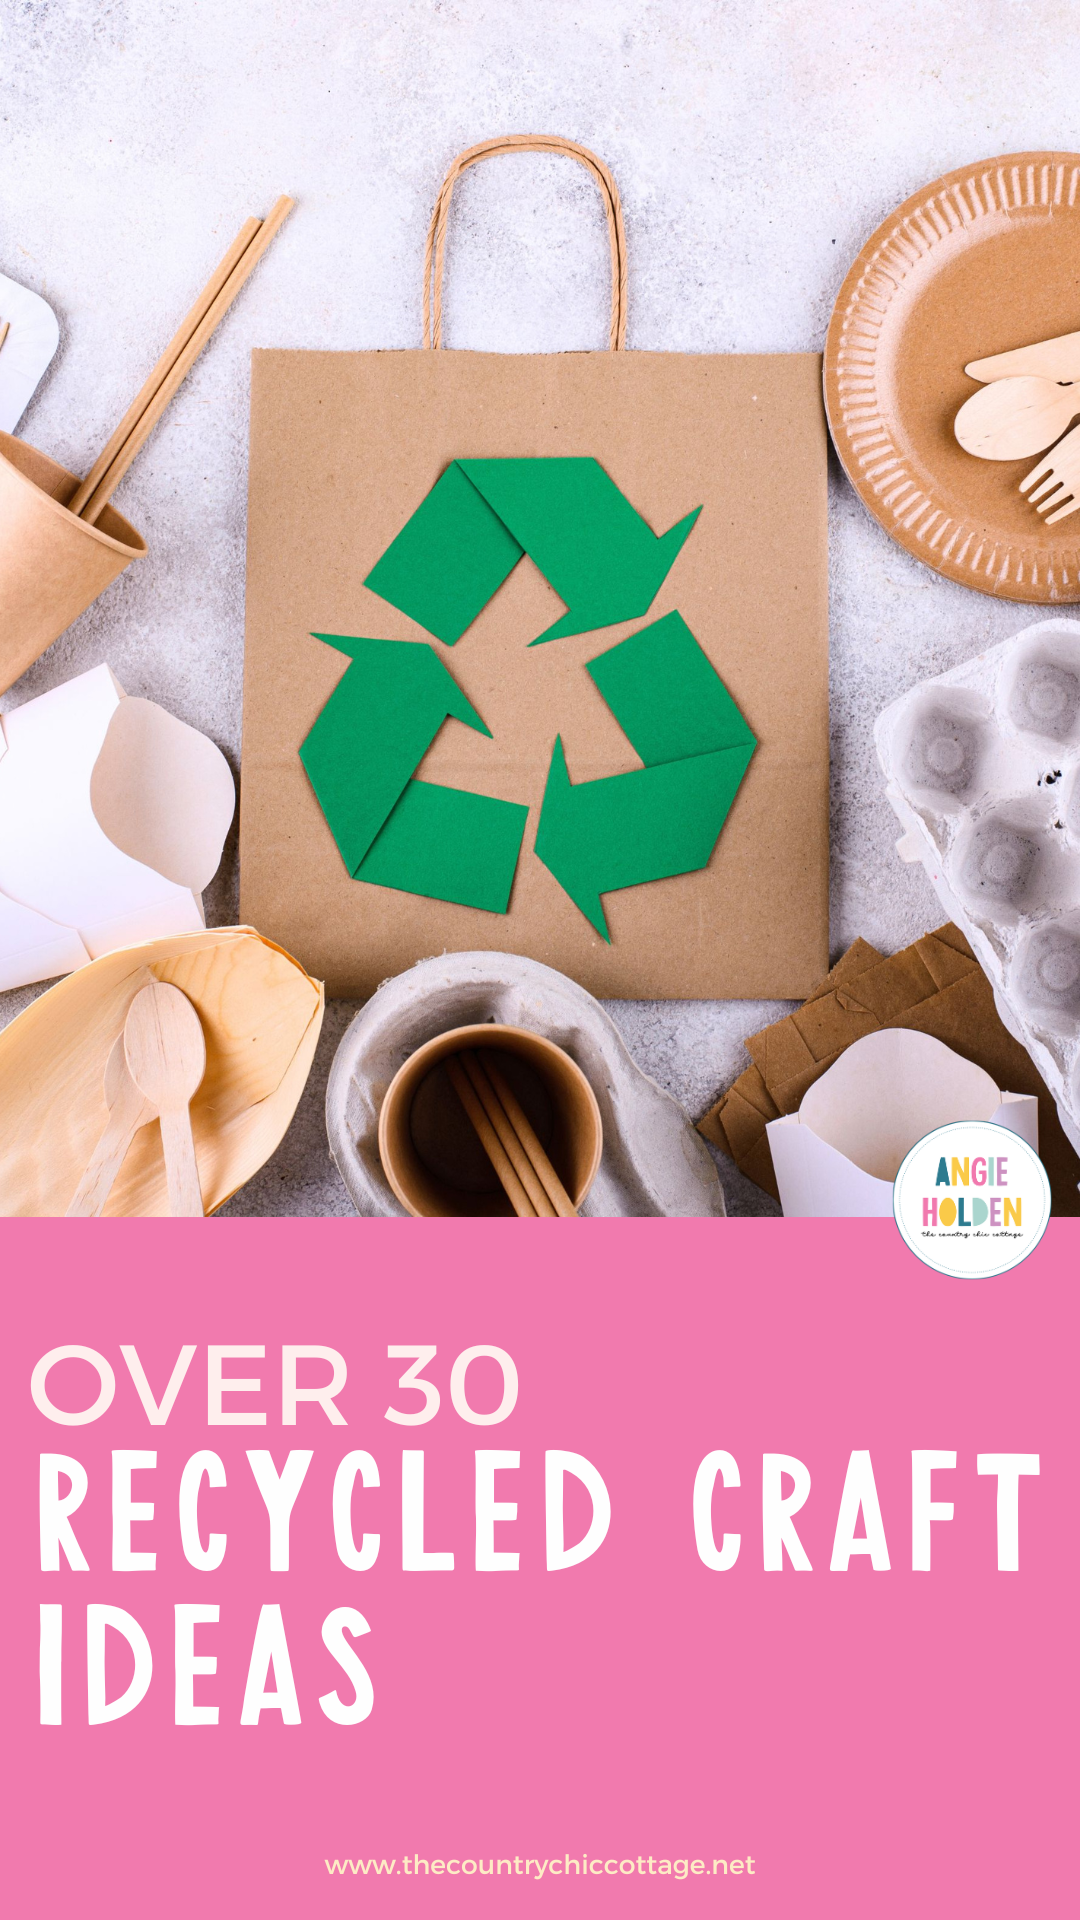 Over 30 Recycled Craft Ideas